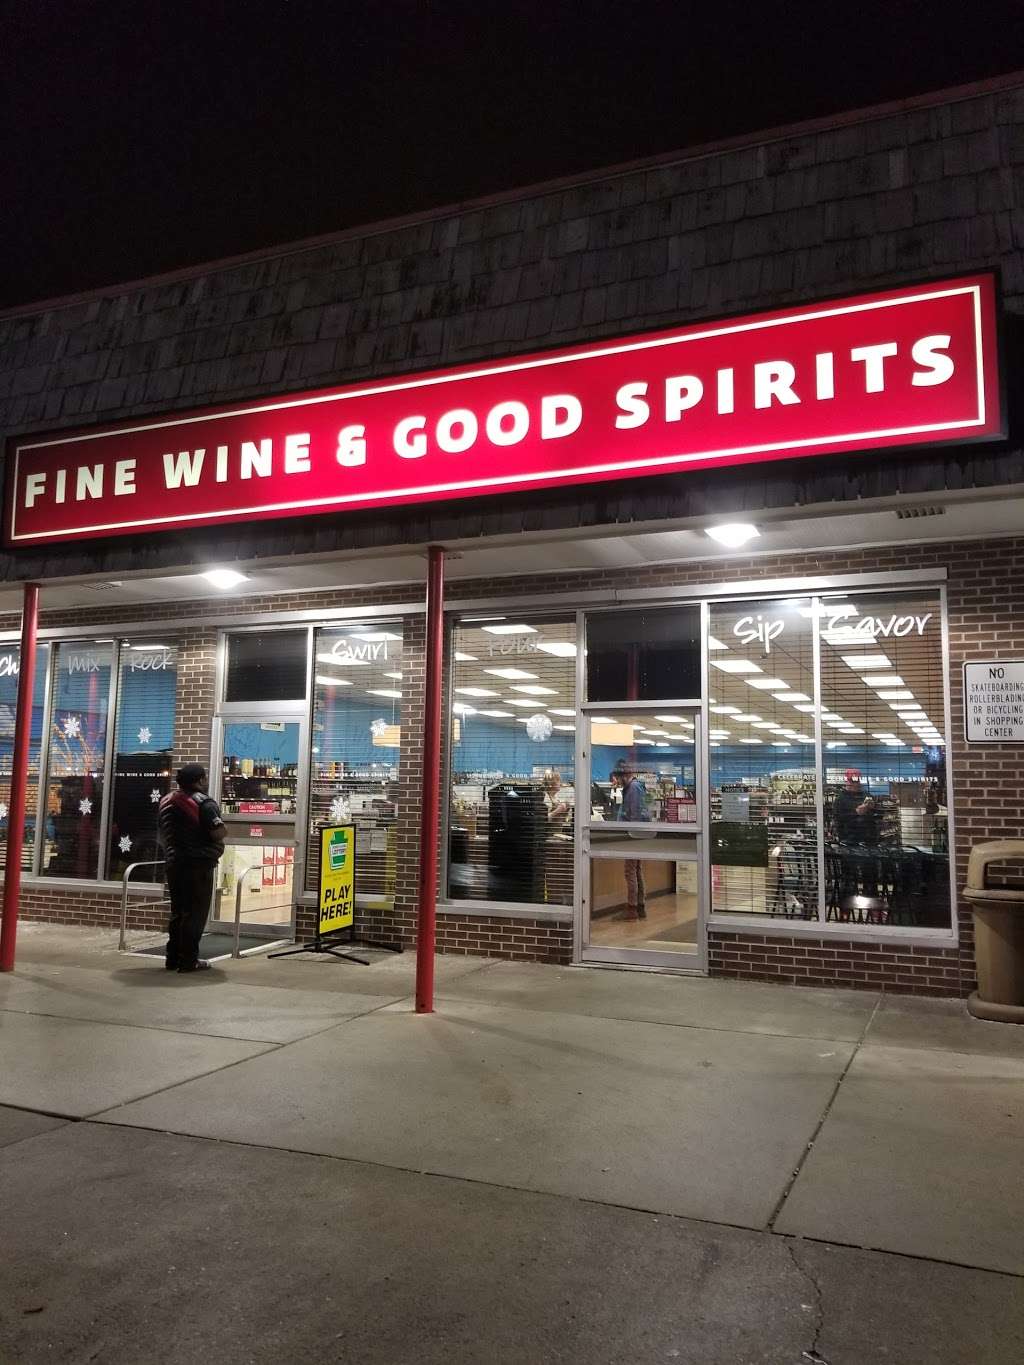 Fine Wine & Good Spirits - store  | Photo 2 of 3 | Address: 414 Lincoln Ave, East Stroudsburg, PA 18301, USA | Phone: (570) 424-3940